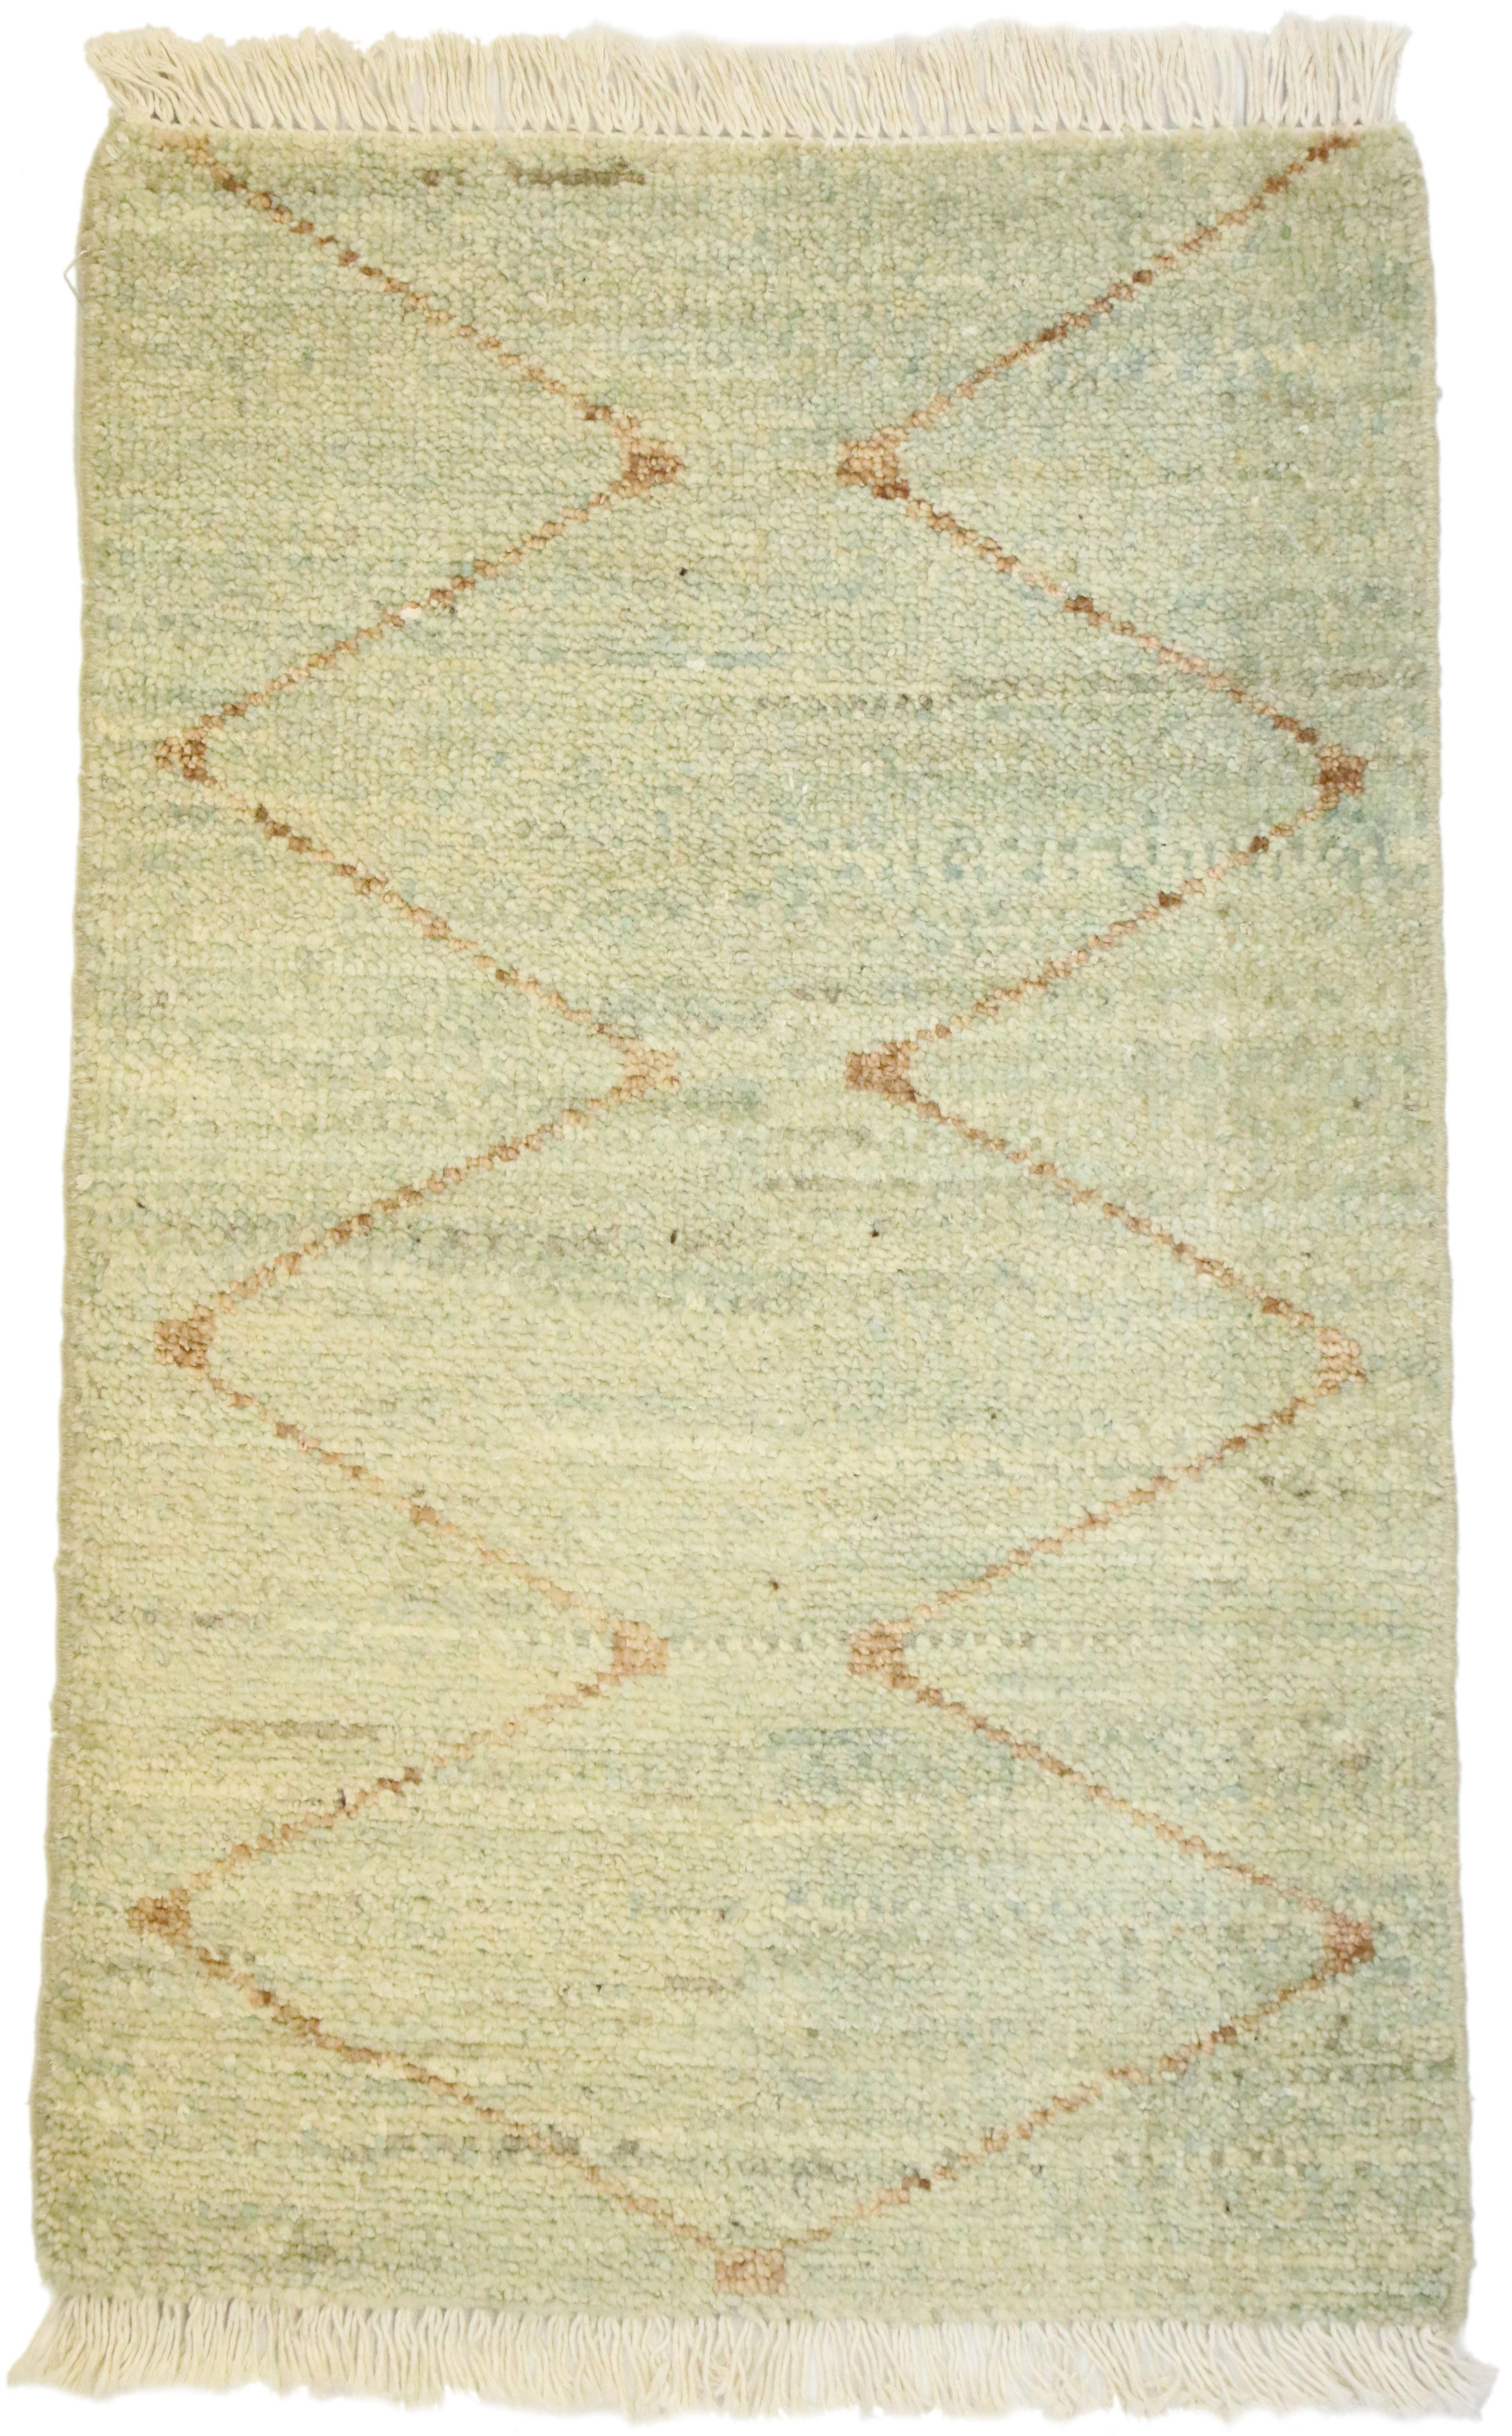 New Contemporary Moroccan Style Rug with Coastal Bohemian Hygge Vibes